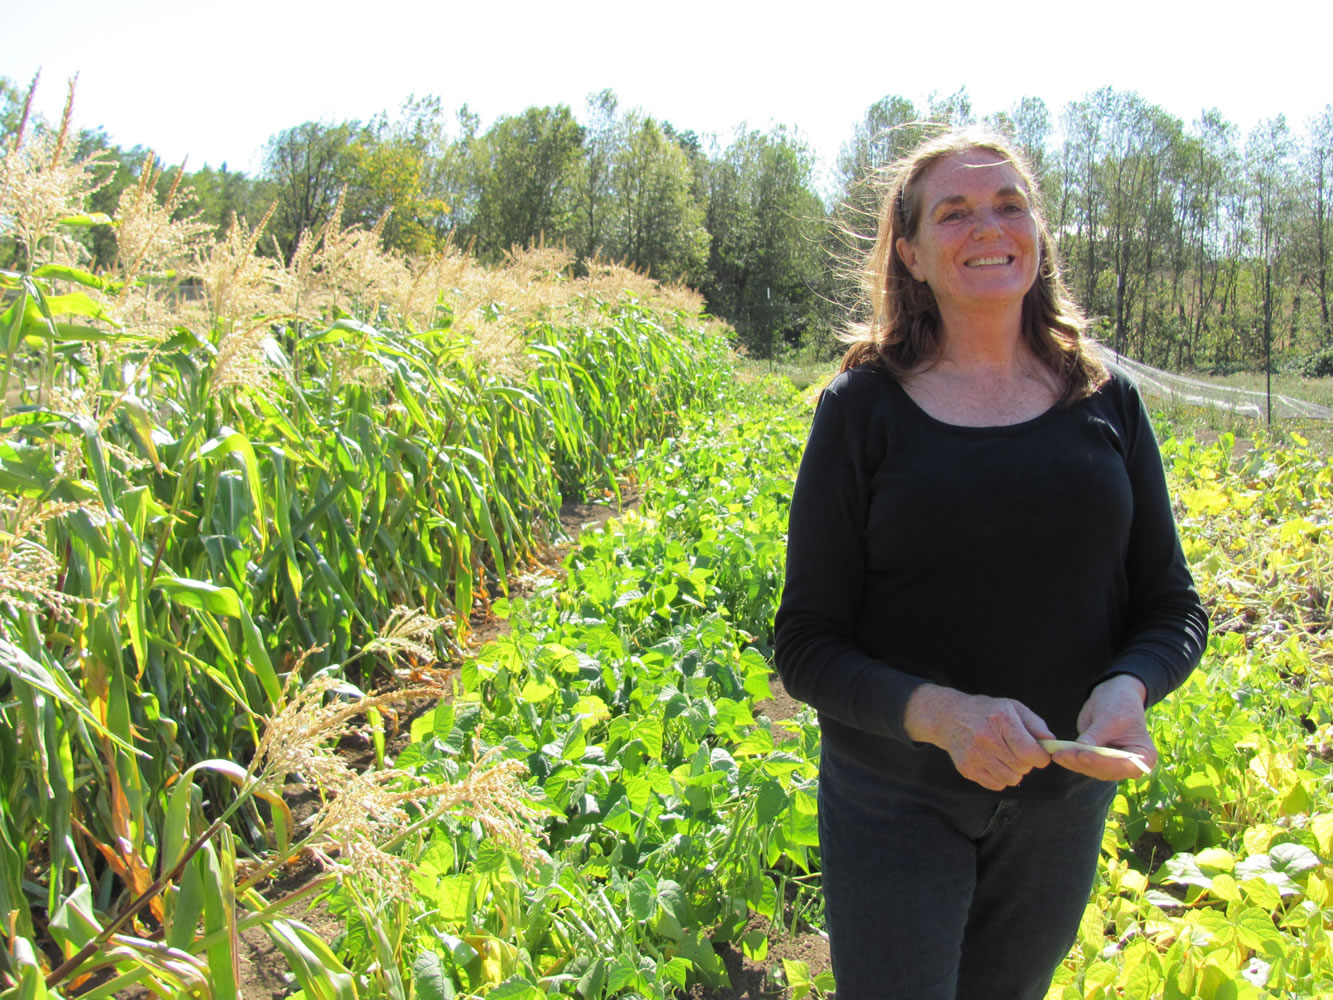 Jo Grace Buck enjoys growing vegetables such as corn, tomatoes, peas, carrots and beets, with her husband Roy (not pictured). In all, there are more than 50 varieties of produce grown at their Ever Green Farm, in Washougal. &quot;We want to learn and give options to people,&quot; Jo Grace said.